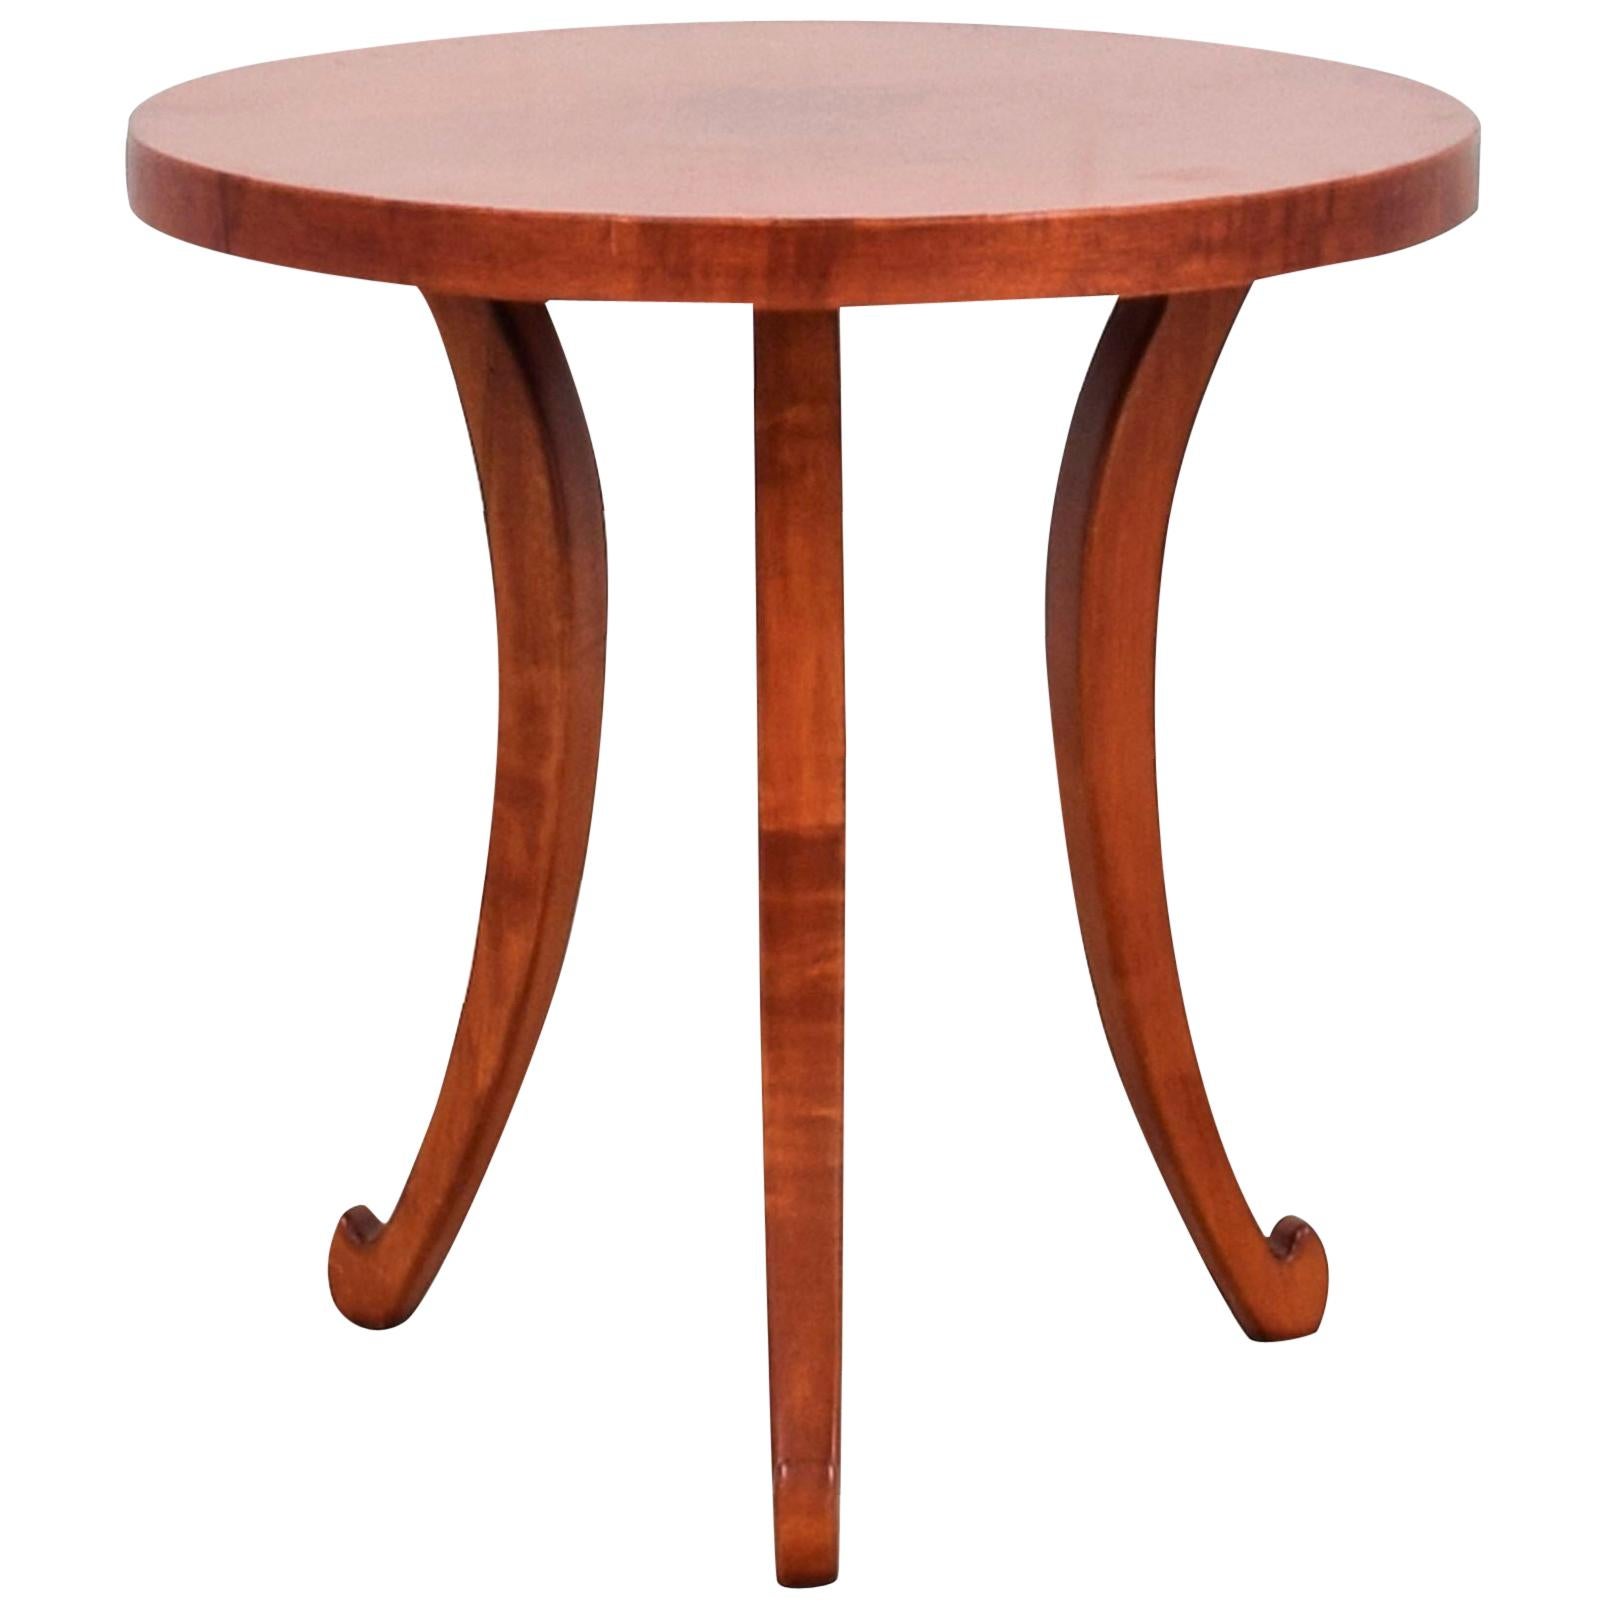 Postmodern curly maple round side table by Dialogica, New York. 1996. Rare piece. Great condition. Iconic curly legs.